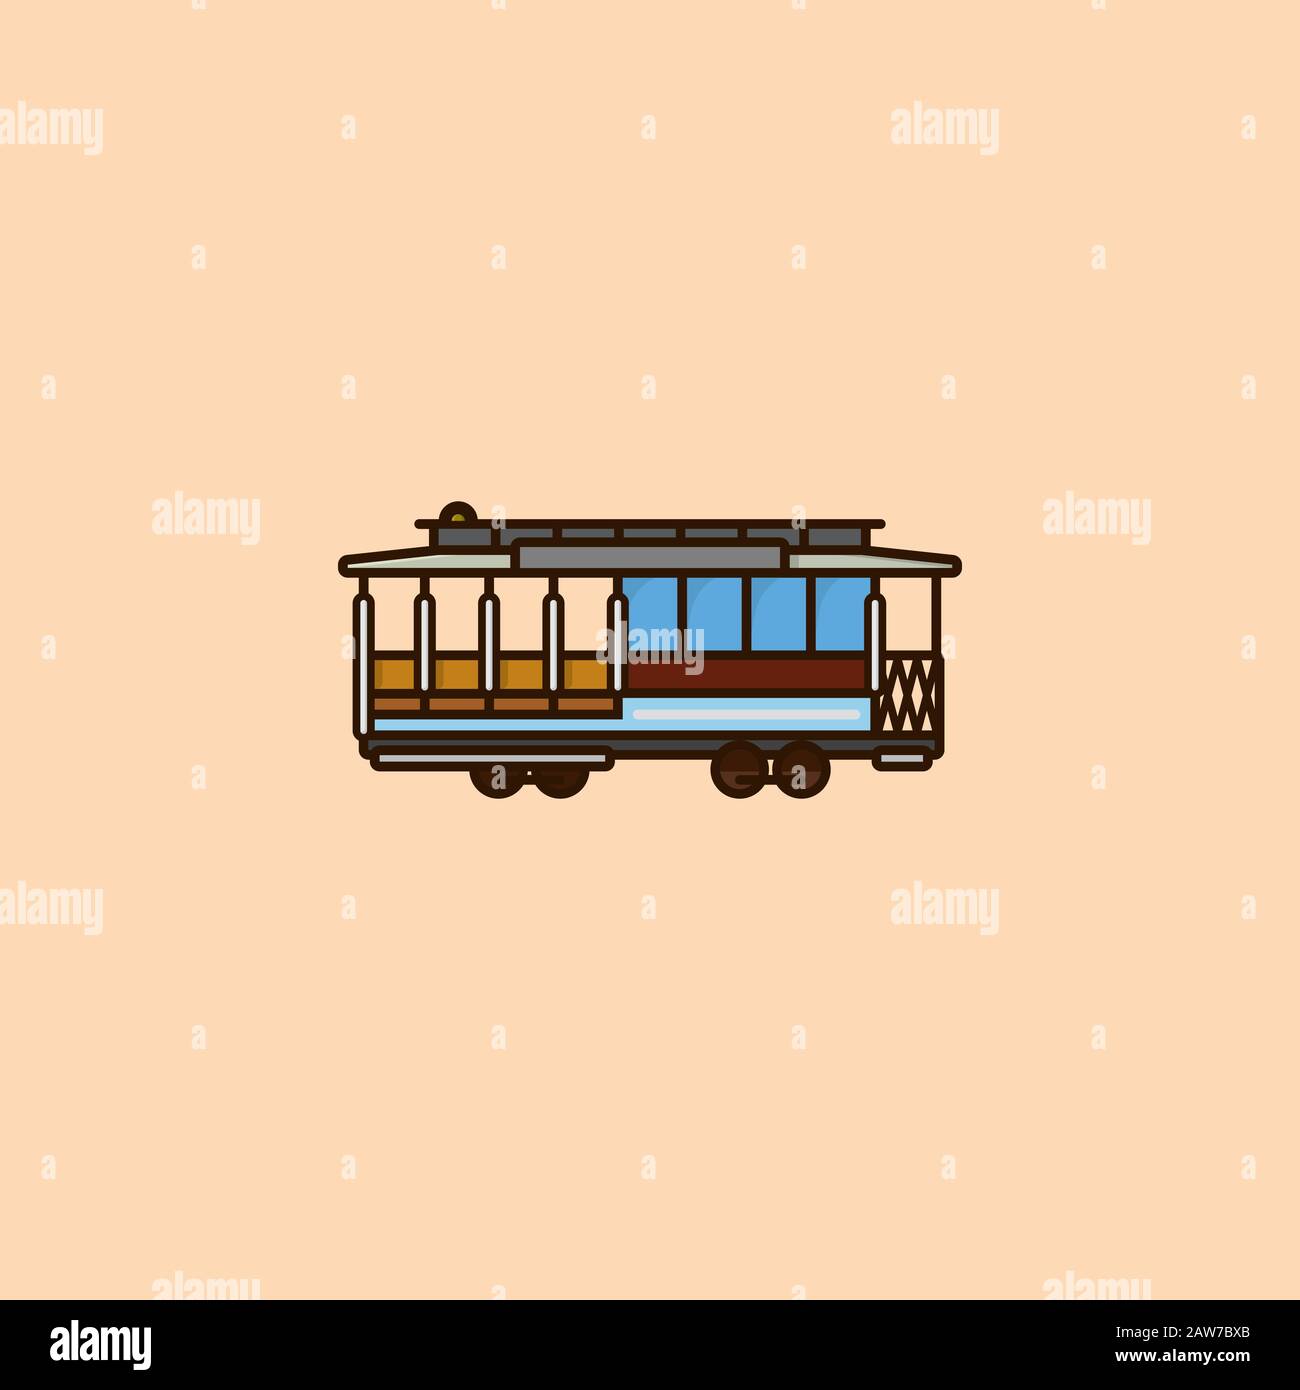 San Francisco cable car illustration for Cable Car Day on January 17. San Francisco public transport color vector symbol. Stock Vector